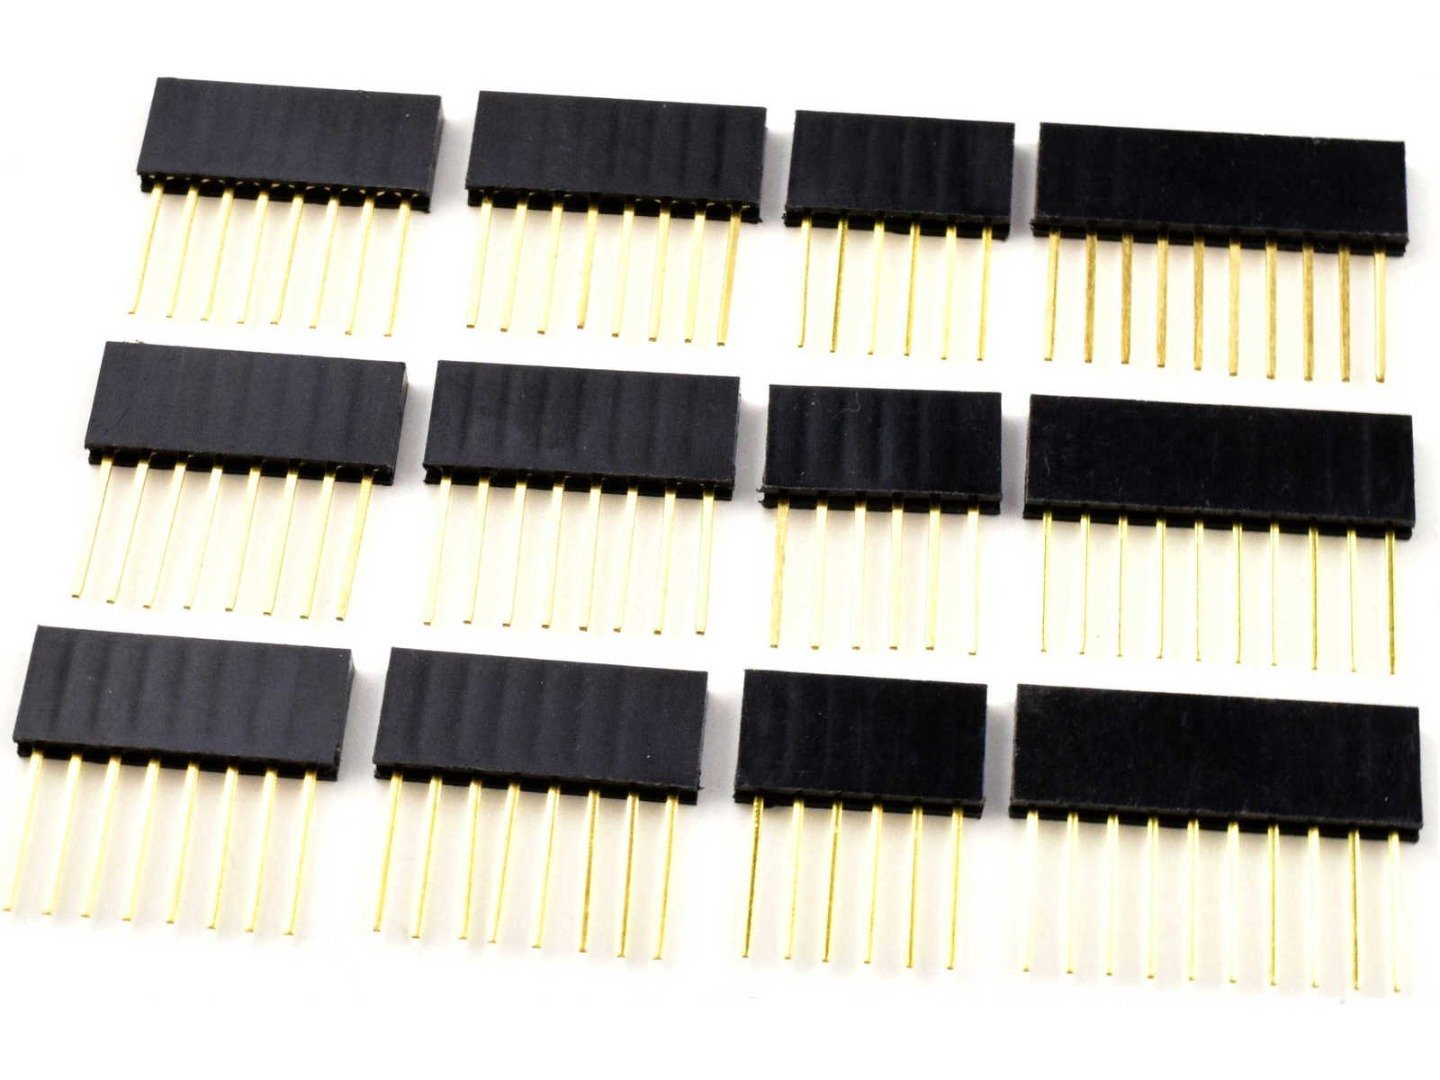 12 pcs Stackable Shield Headers with long leads 11 mm for Arduino prototyping 7